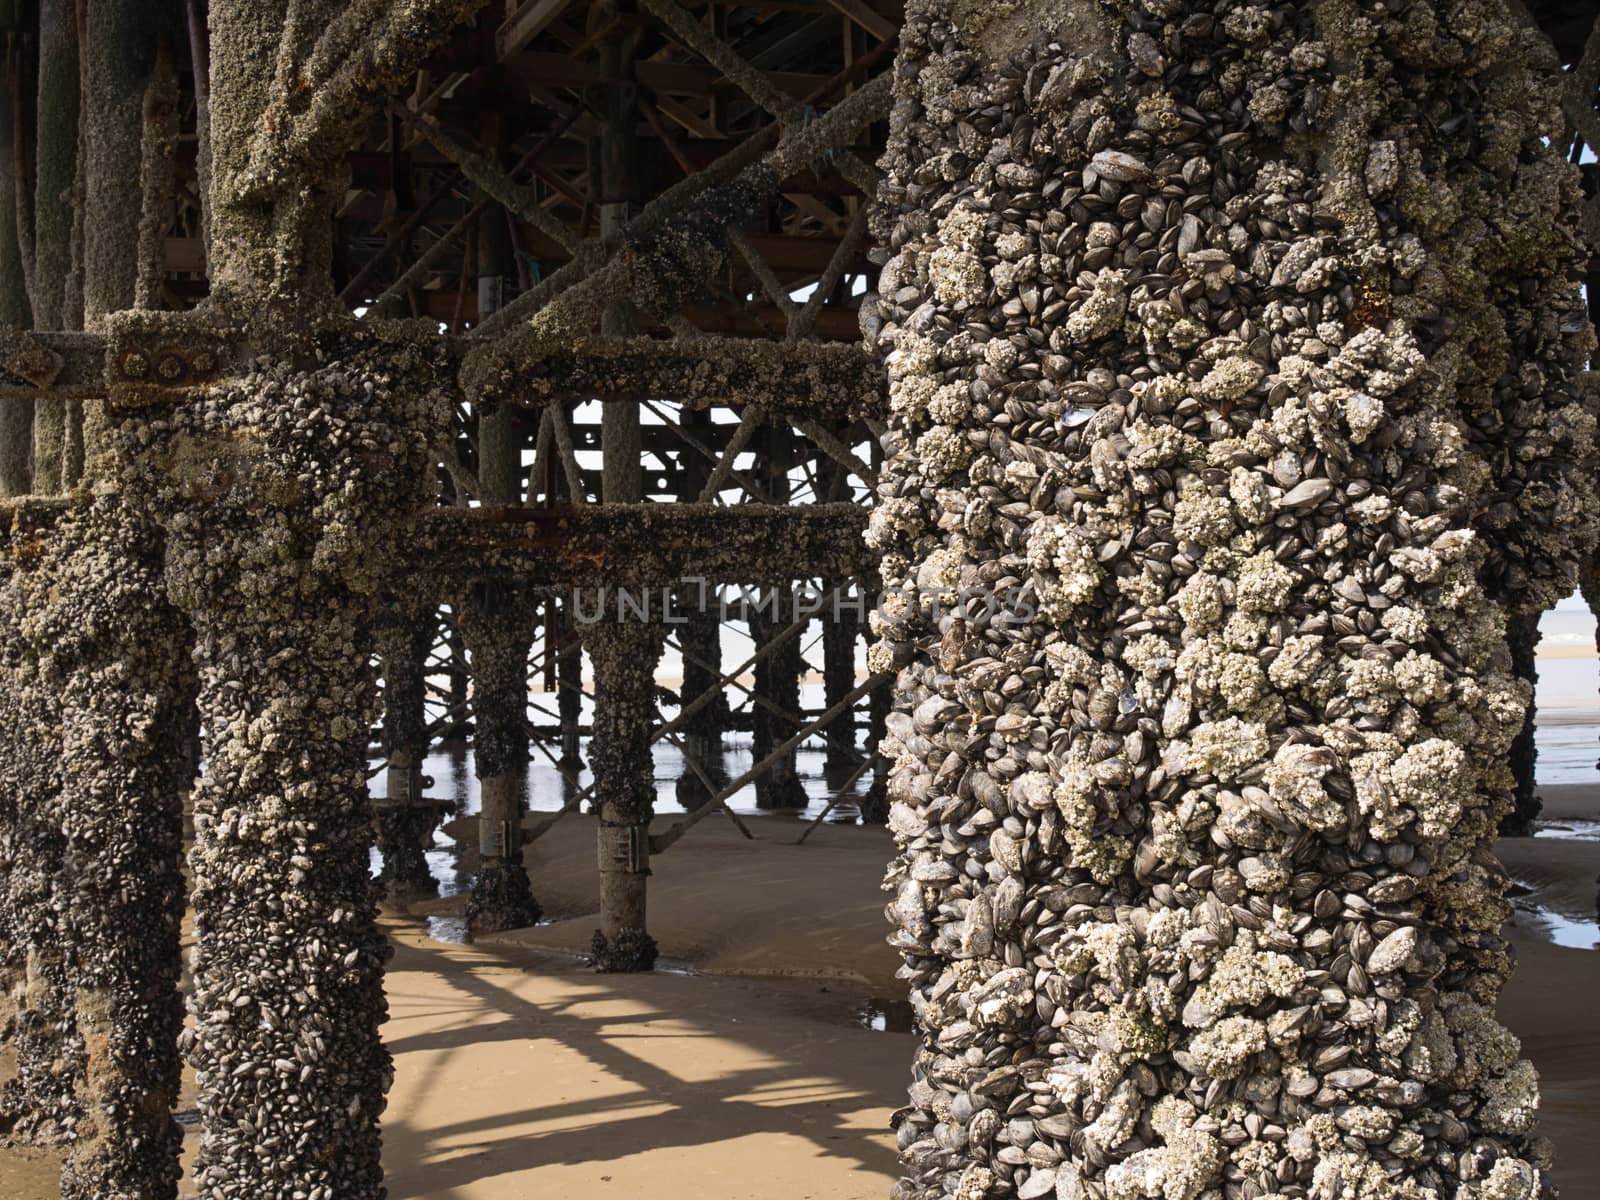 Pier supports with barnacles